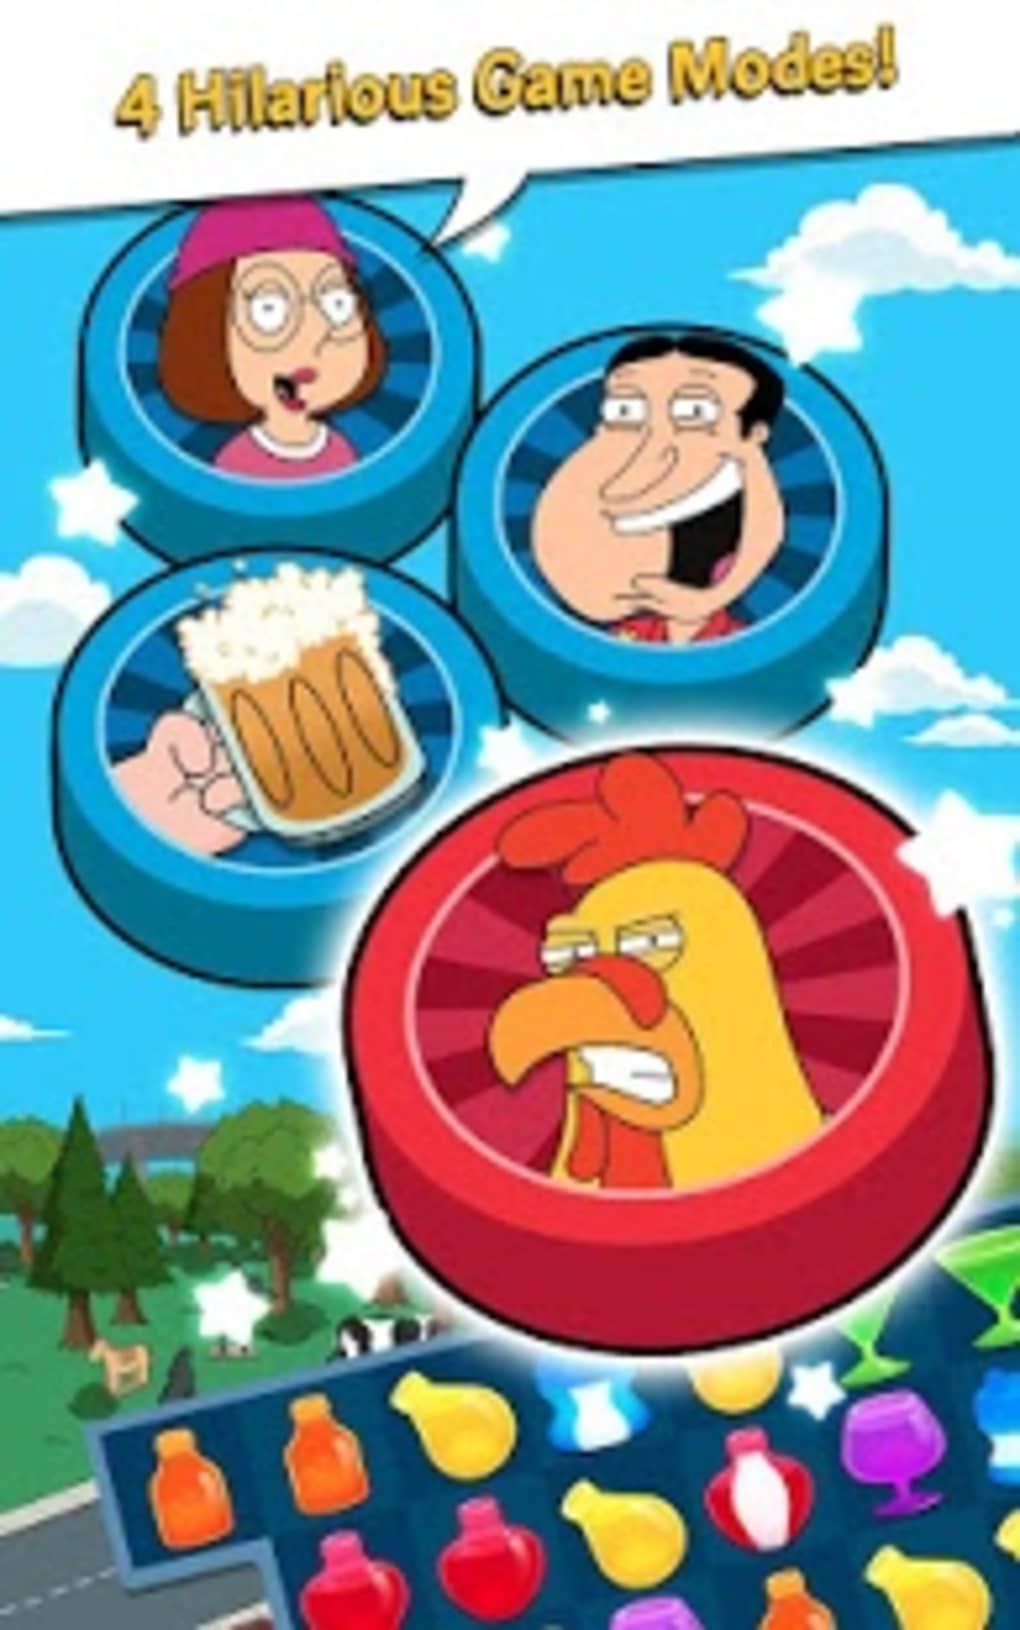 Go along Peter Griffin, Quagmire and the crew on their adventures